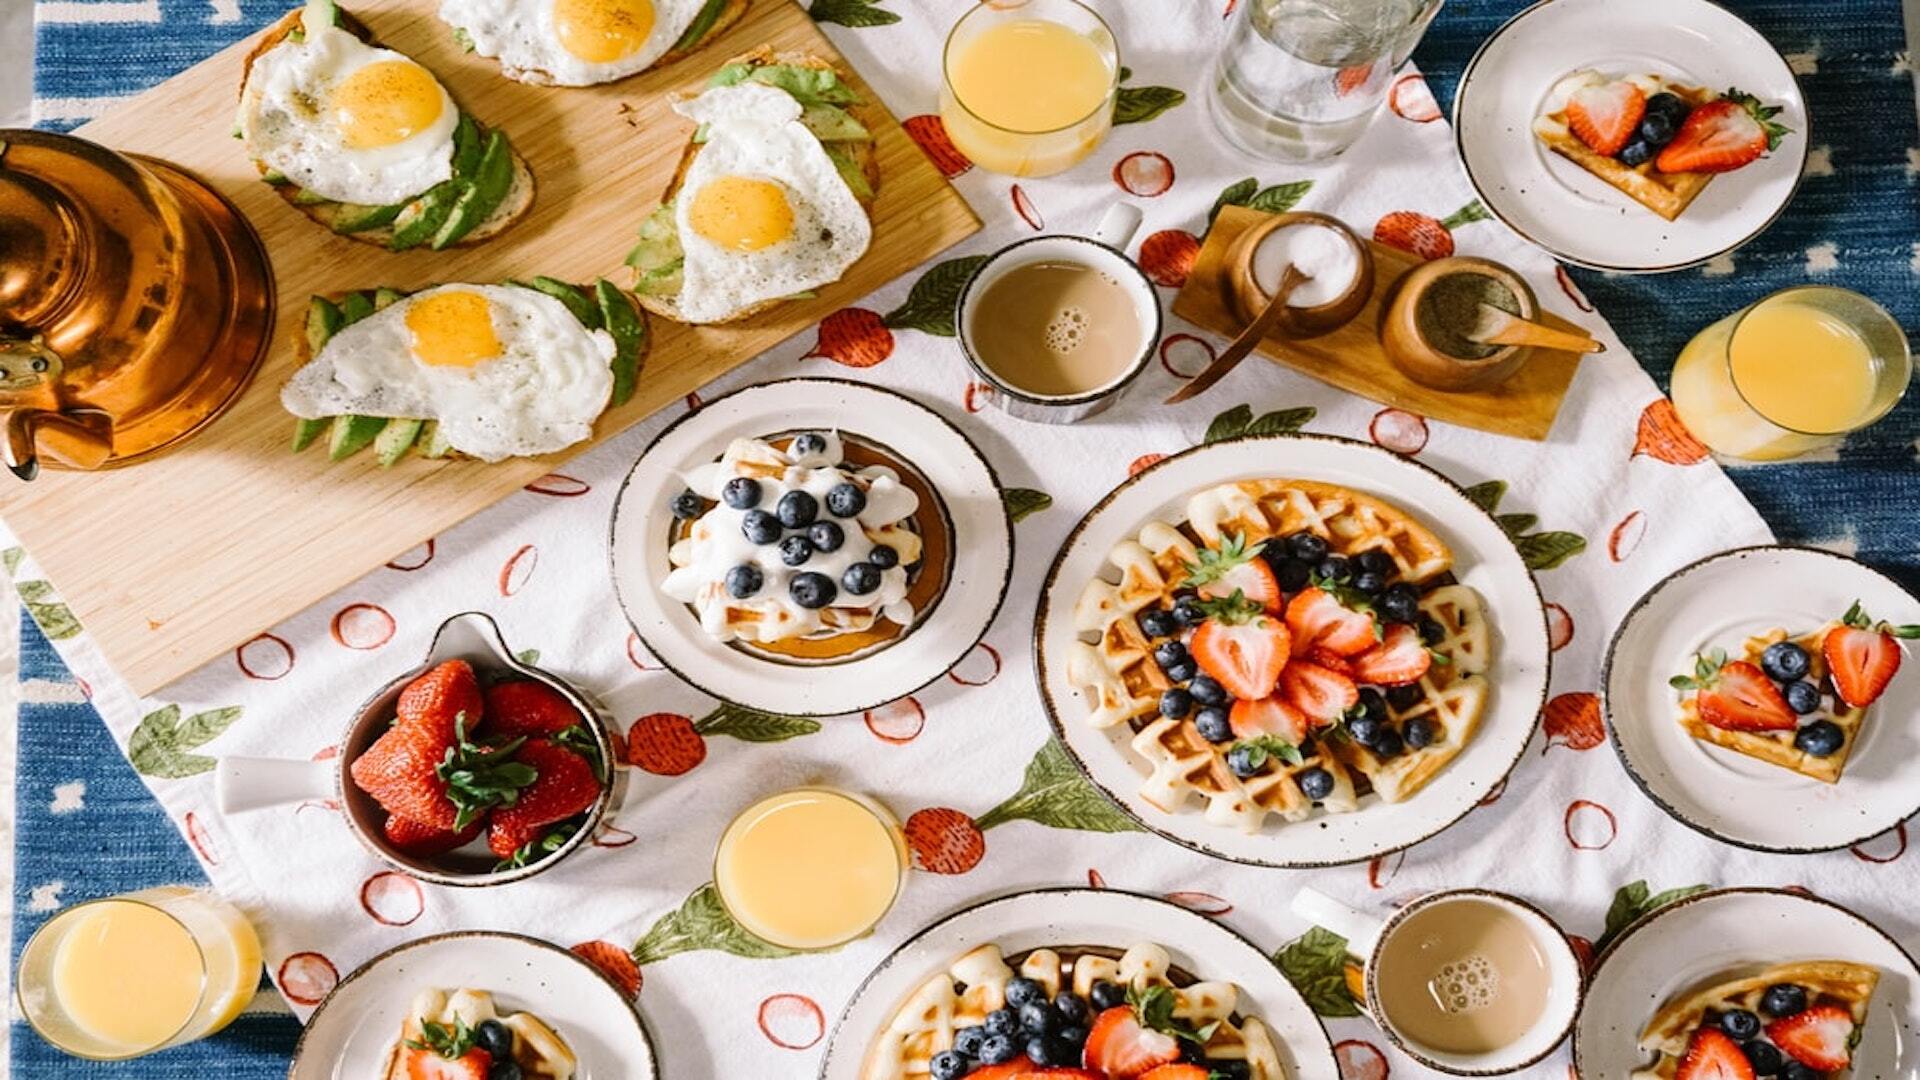 Simple ways to level up your brunch game